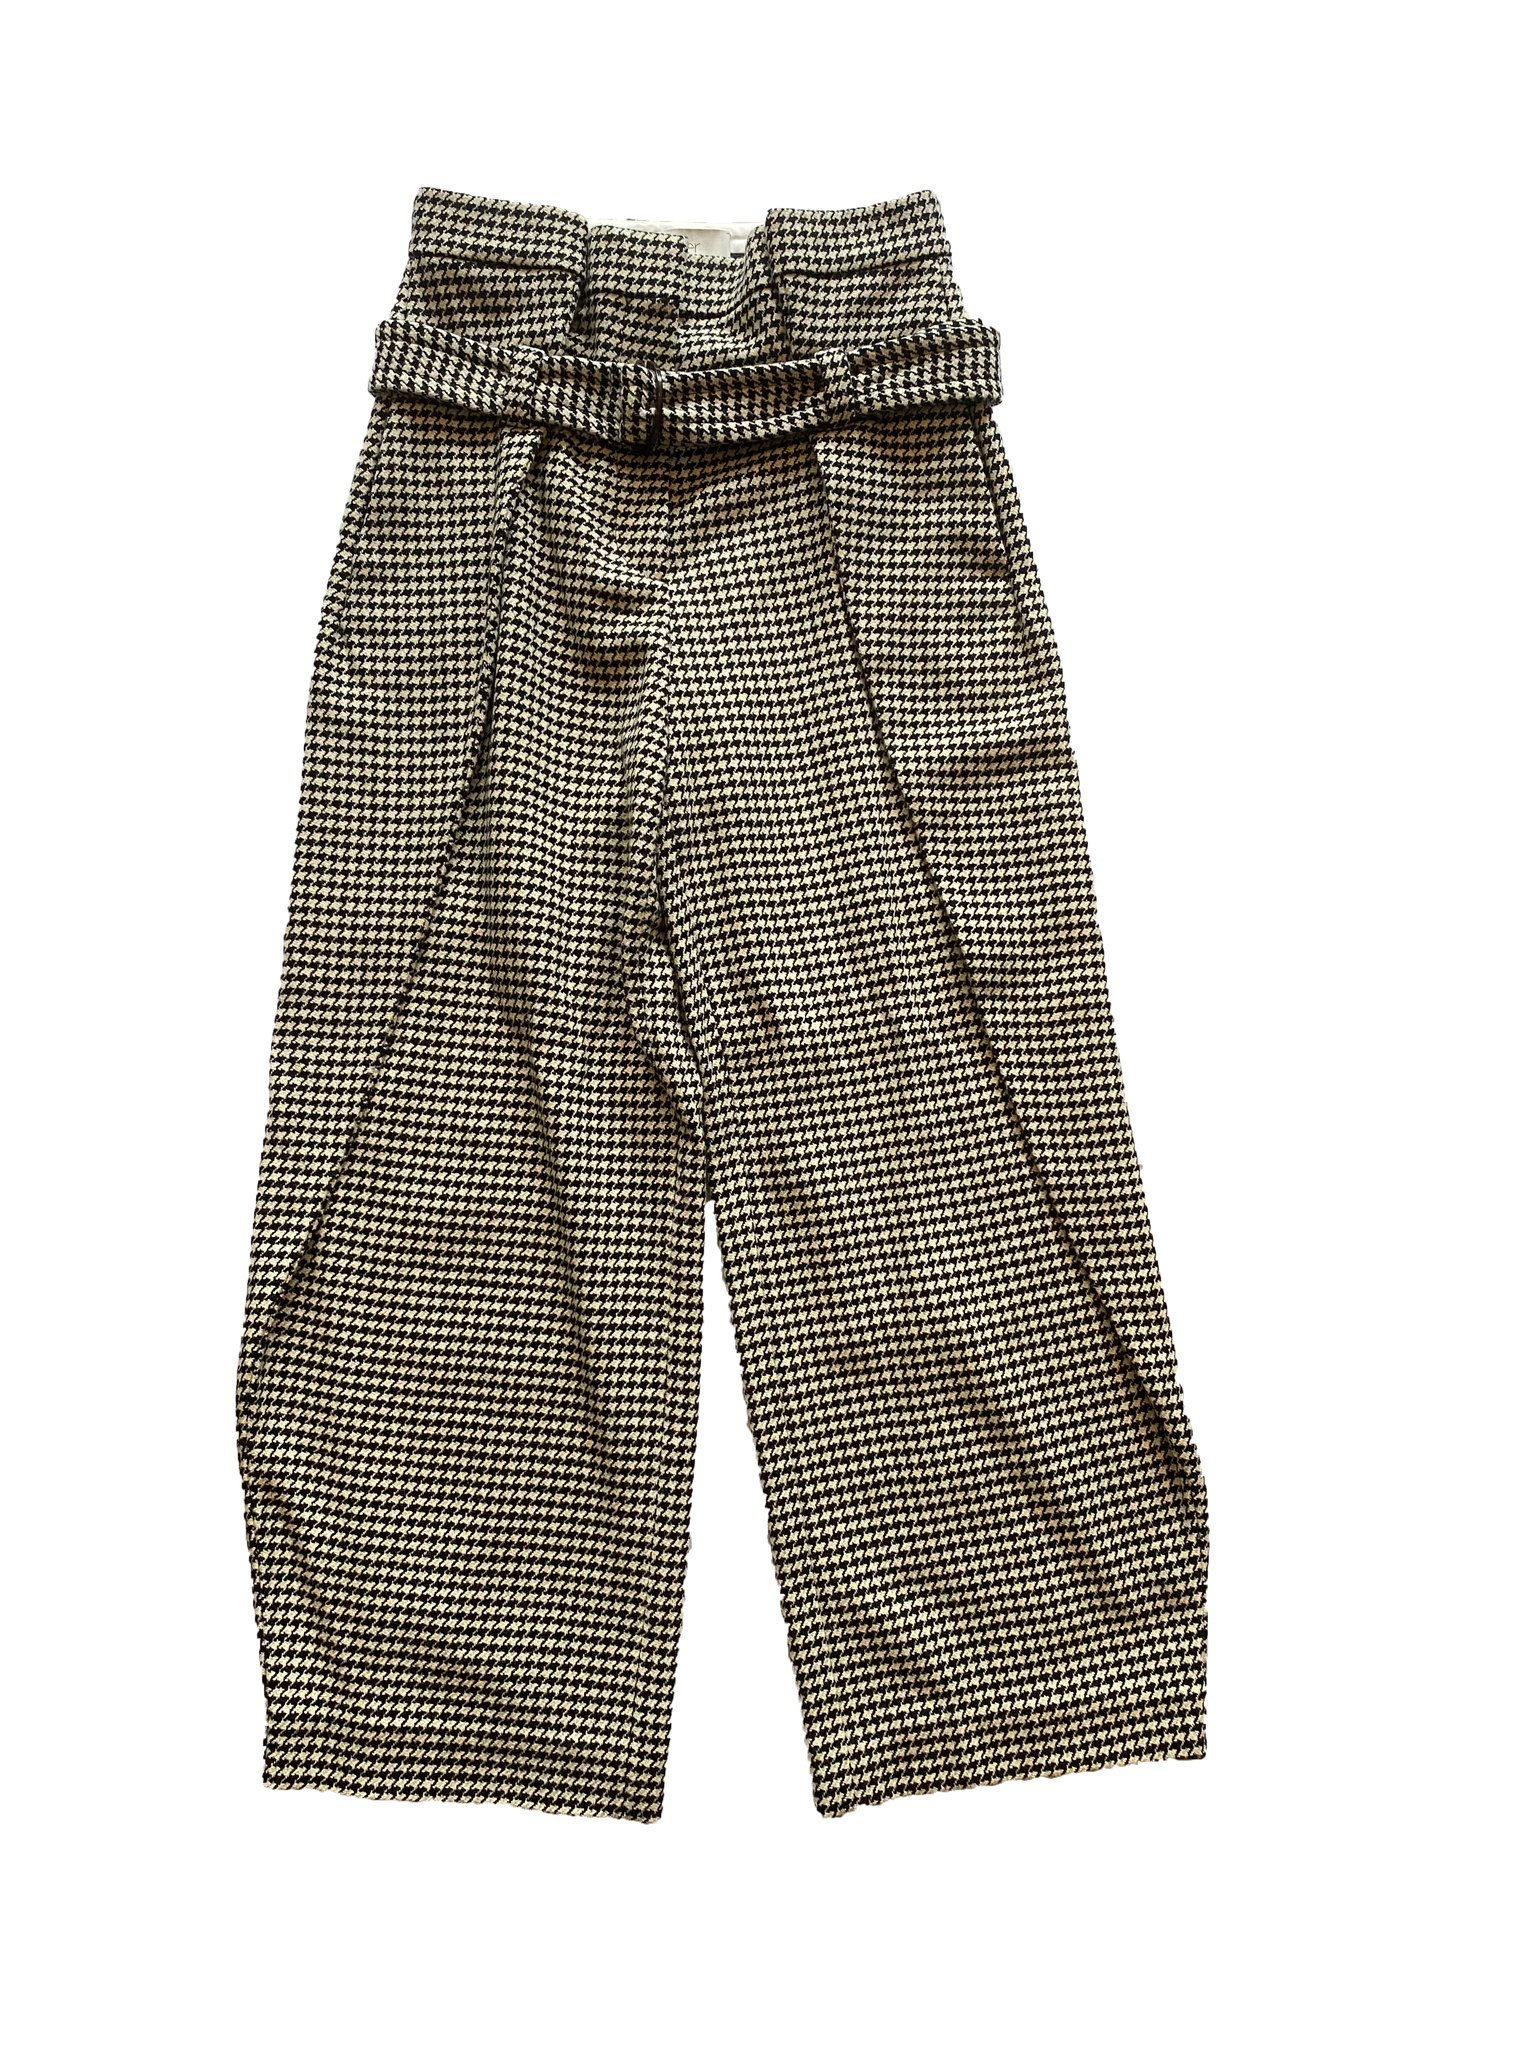 Houndstooth Wool Trousers